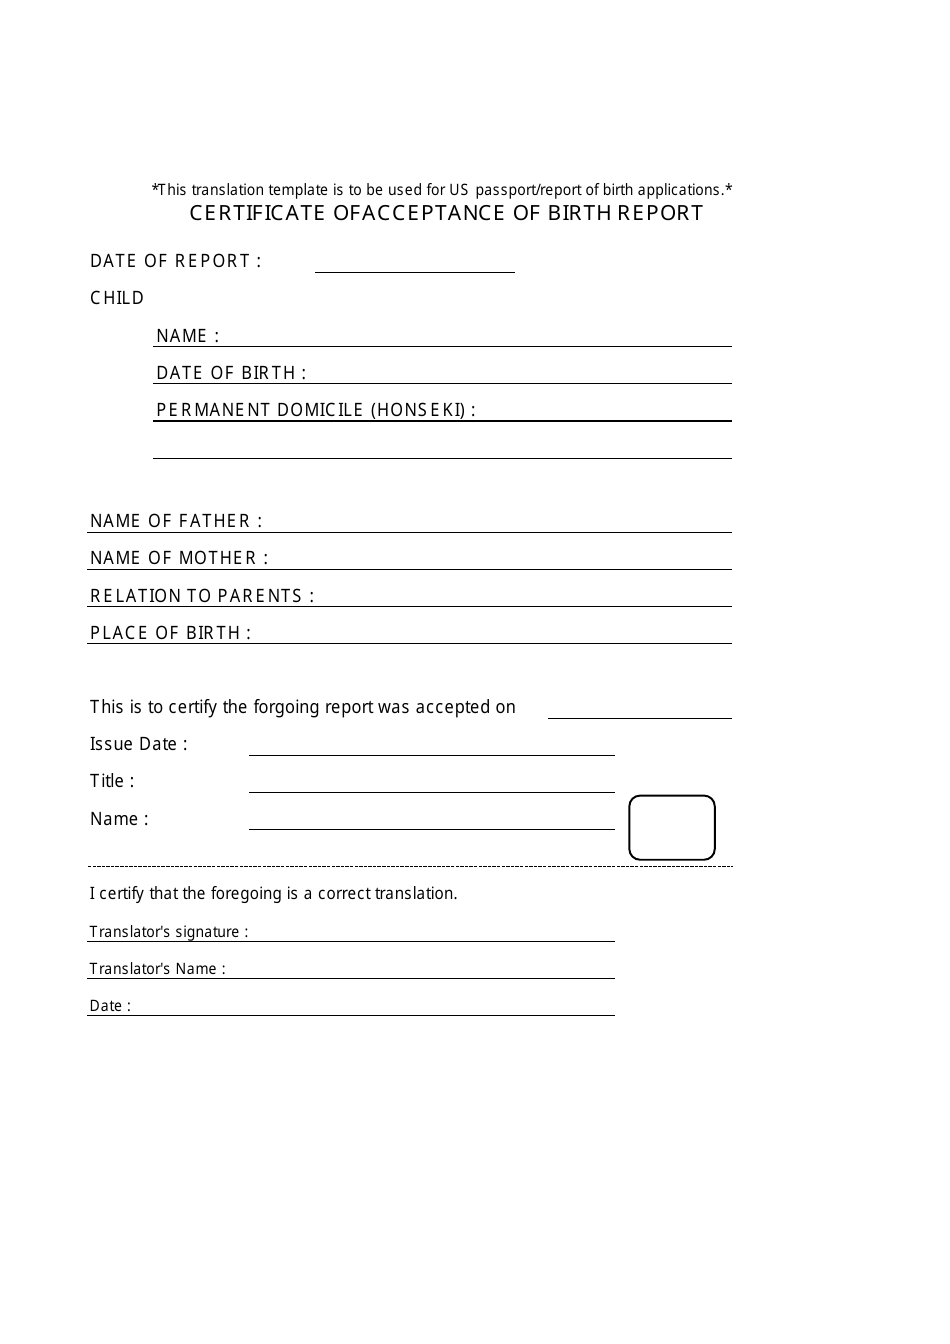 Certificate of Acceptance of Birth Report Download Printable PDF In Certificate Of Acceptance Template